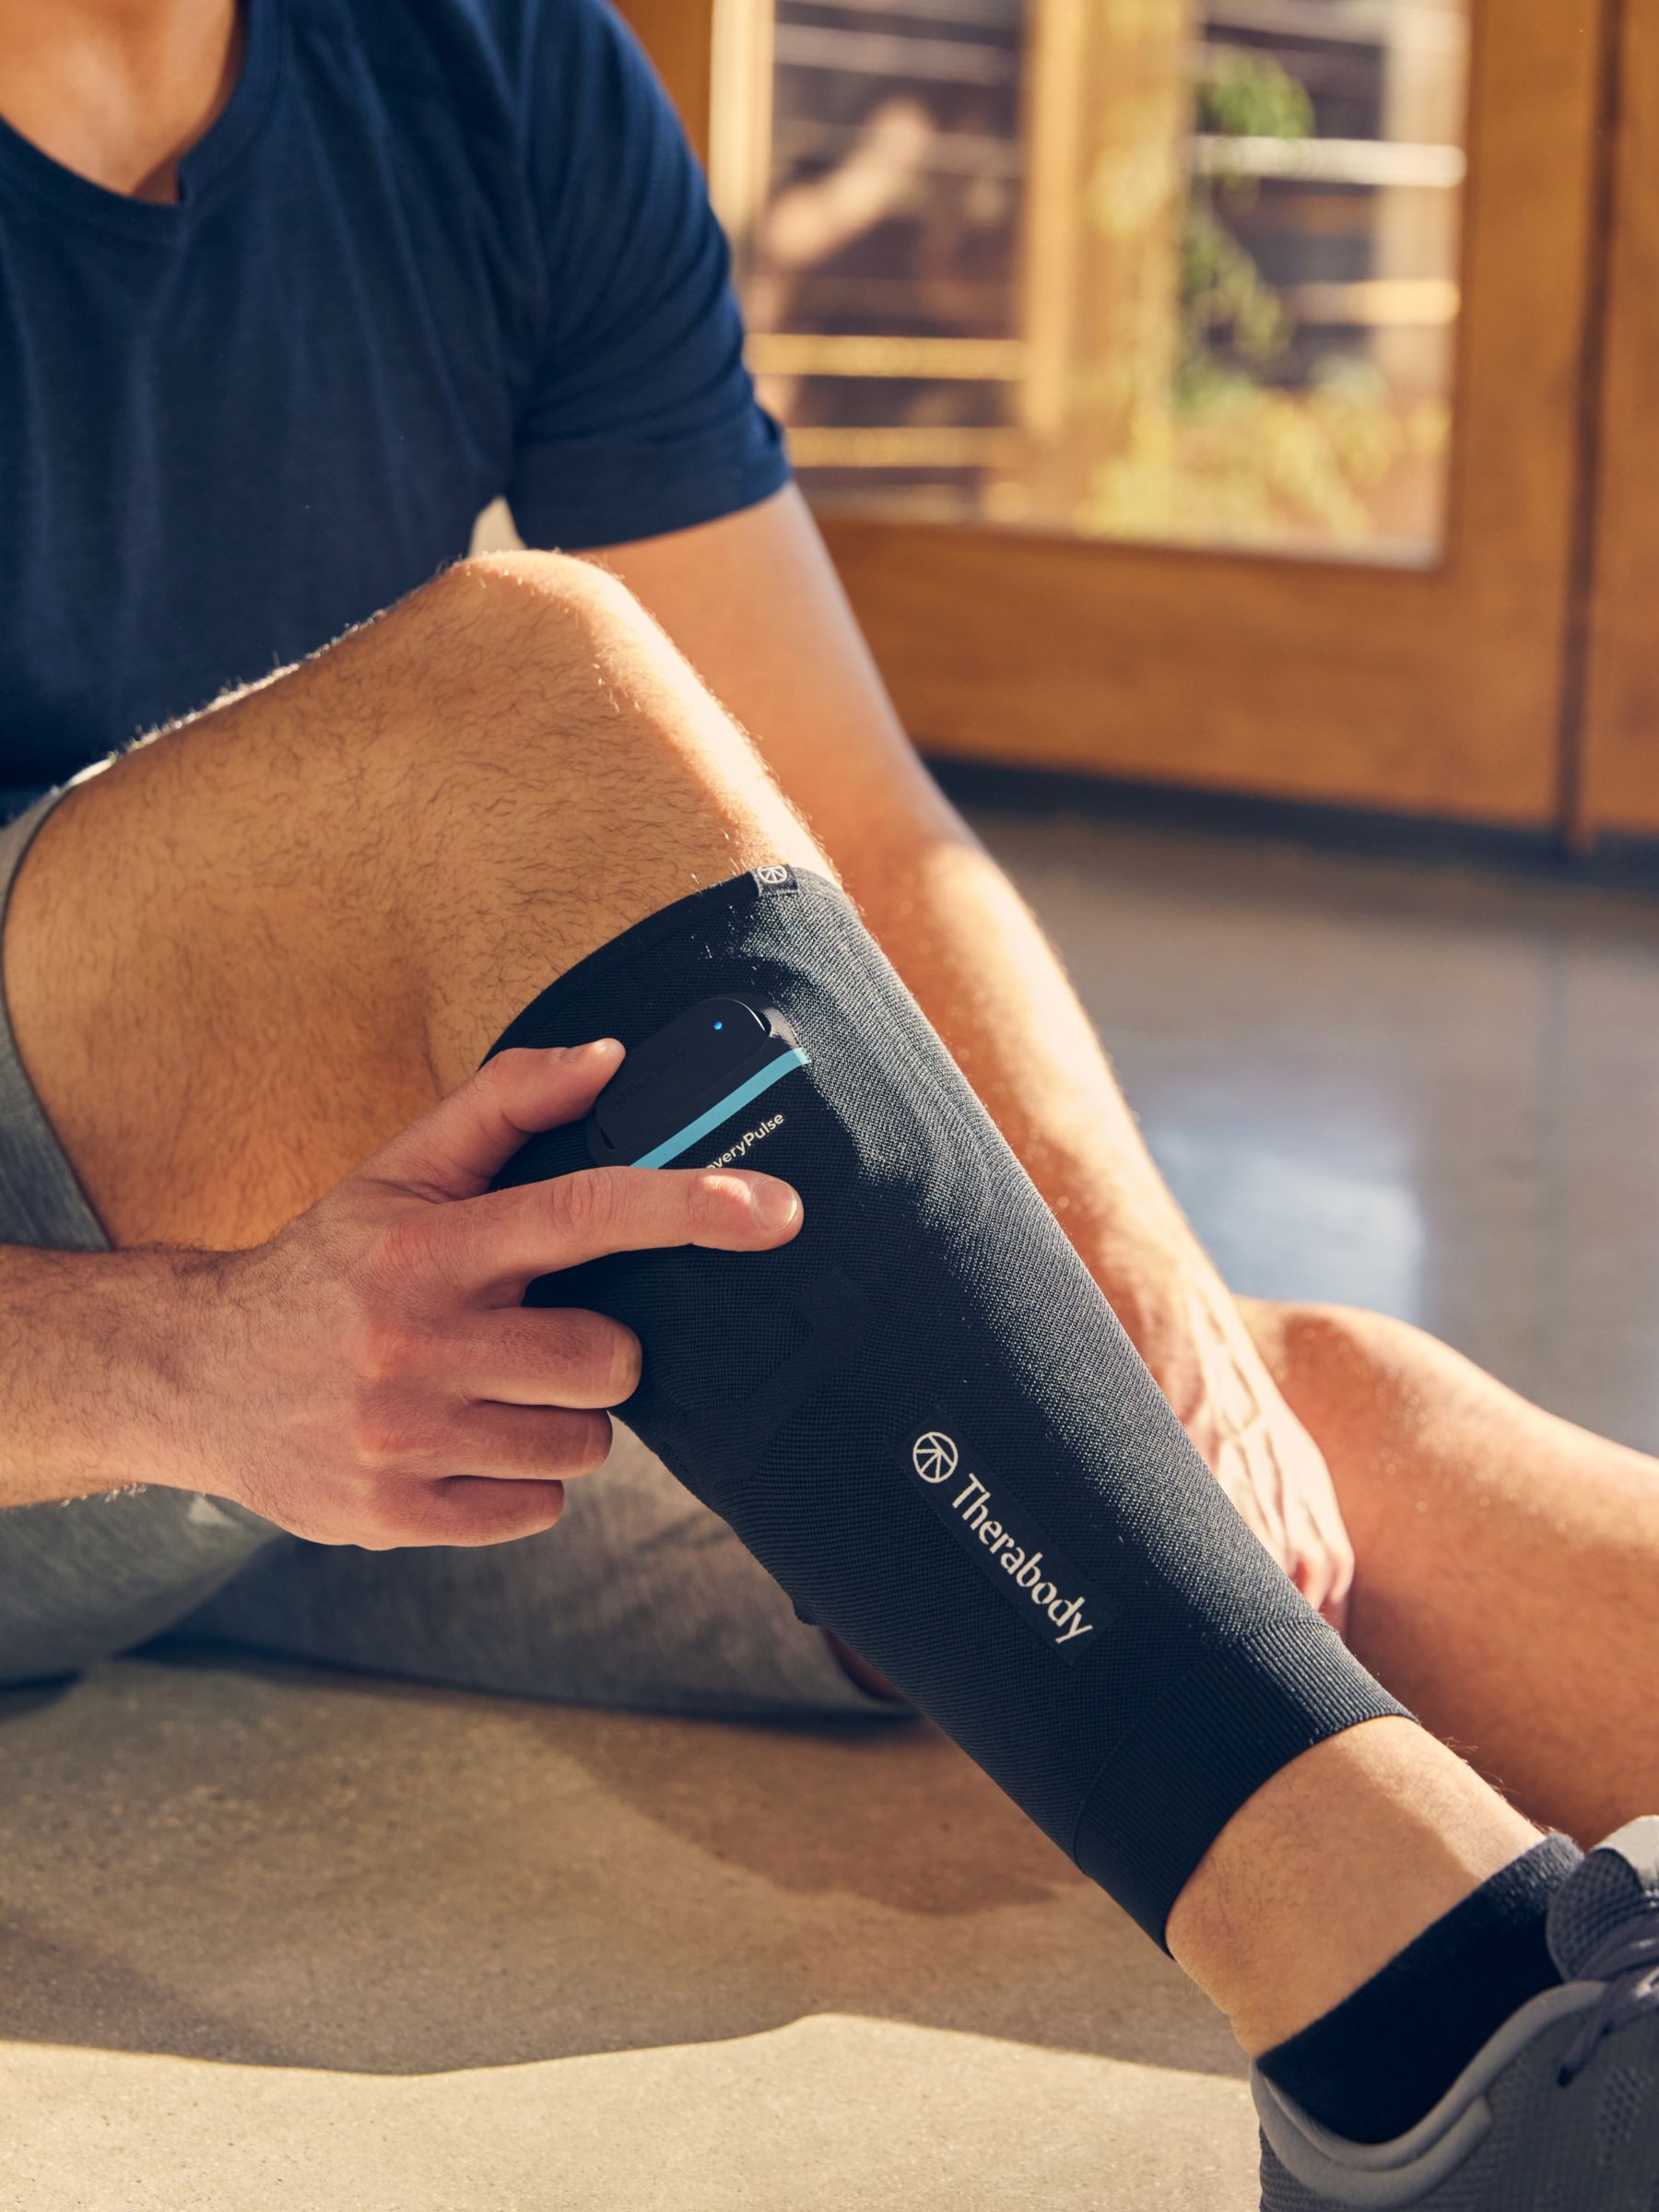 Therabody RecoveryPulse Calf Vibrating Compression Sleeve, Black, XS